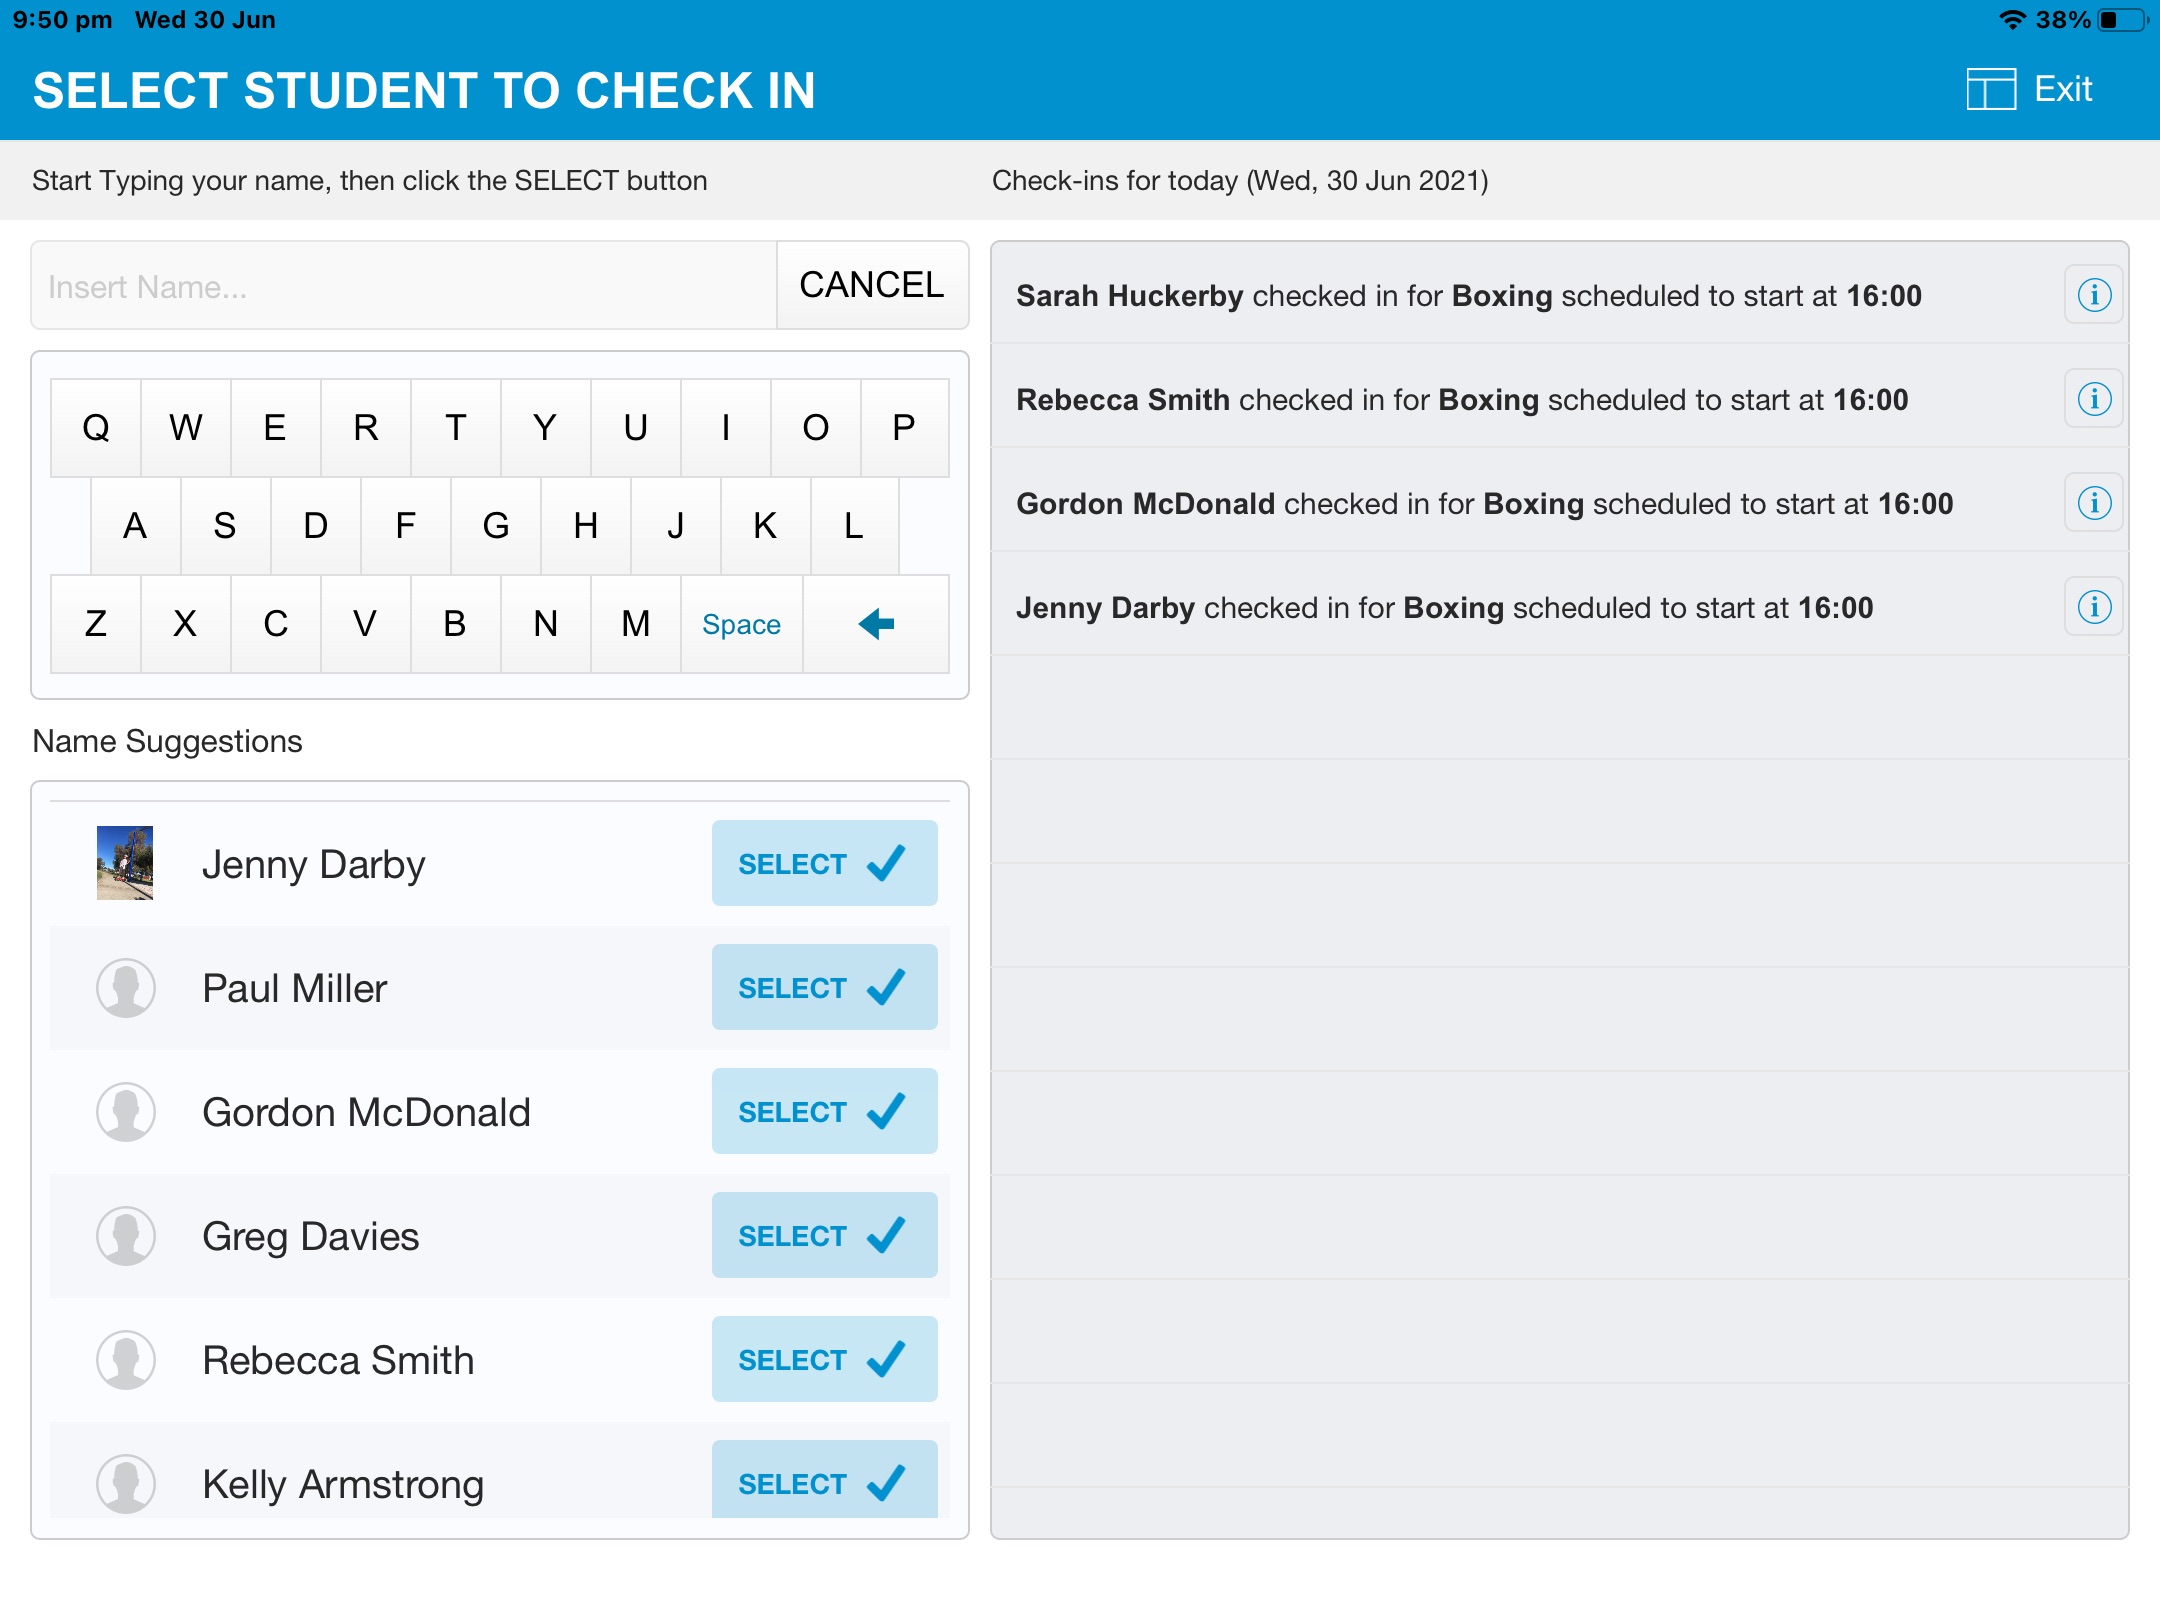 Check-in Student Selection